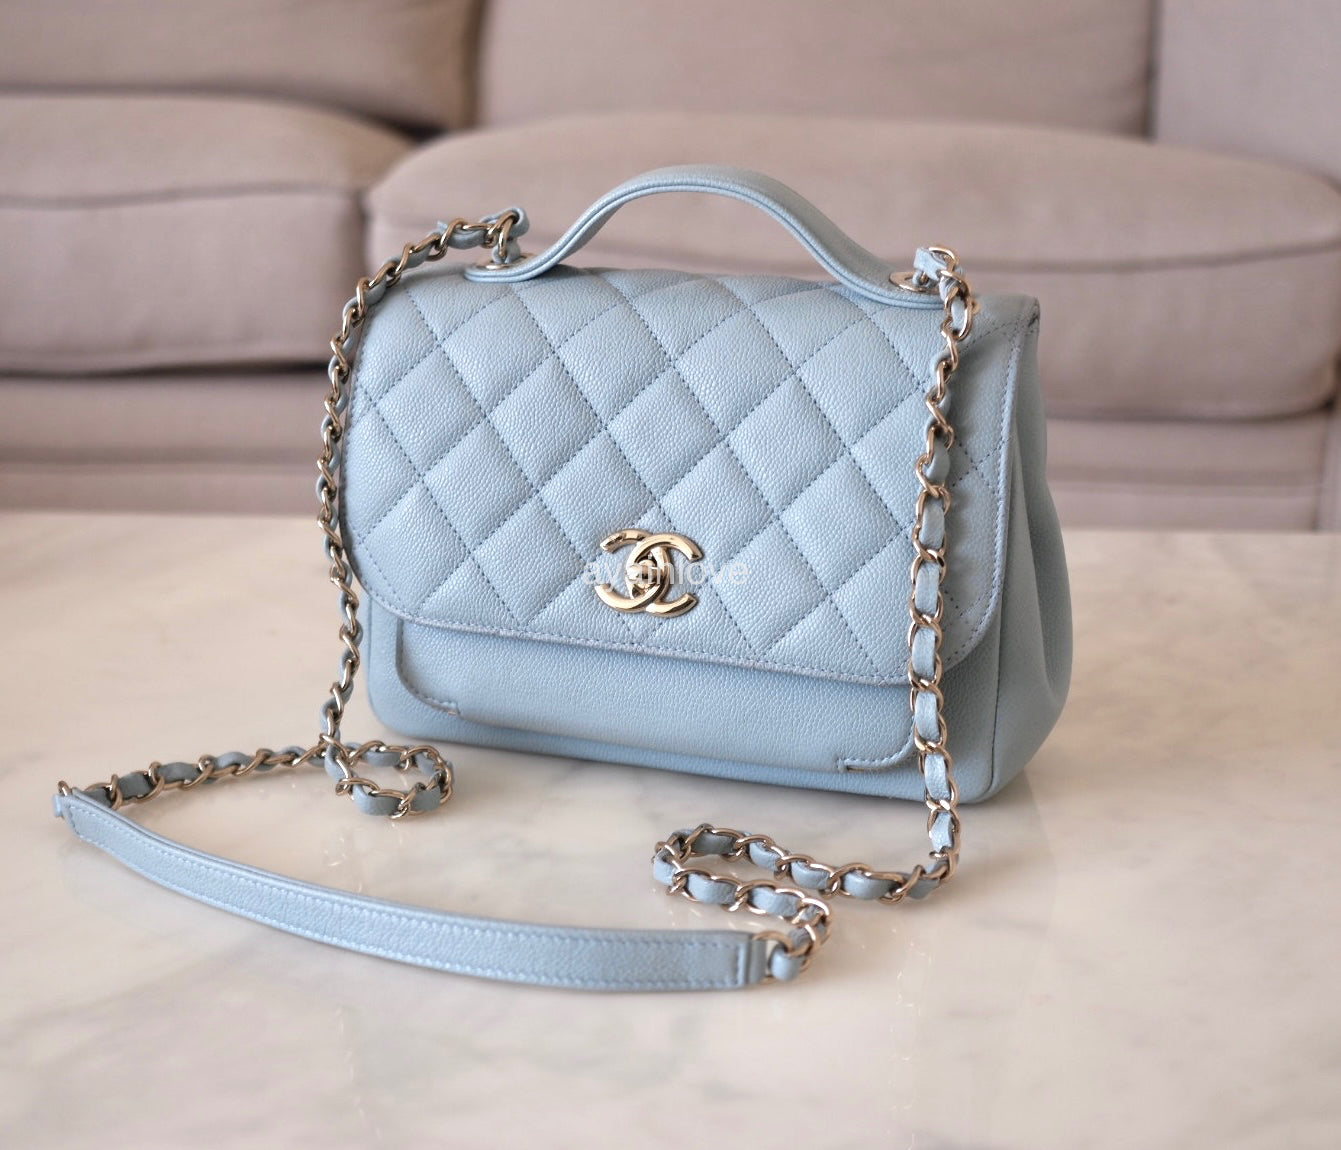 Chanel Business Affinity, Blue Caviar Leather with Gold Hardware